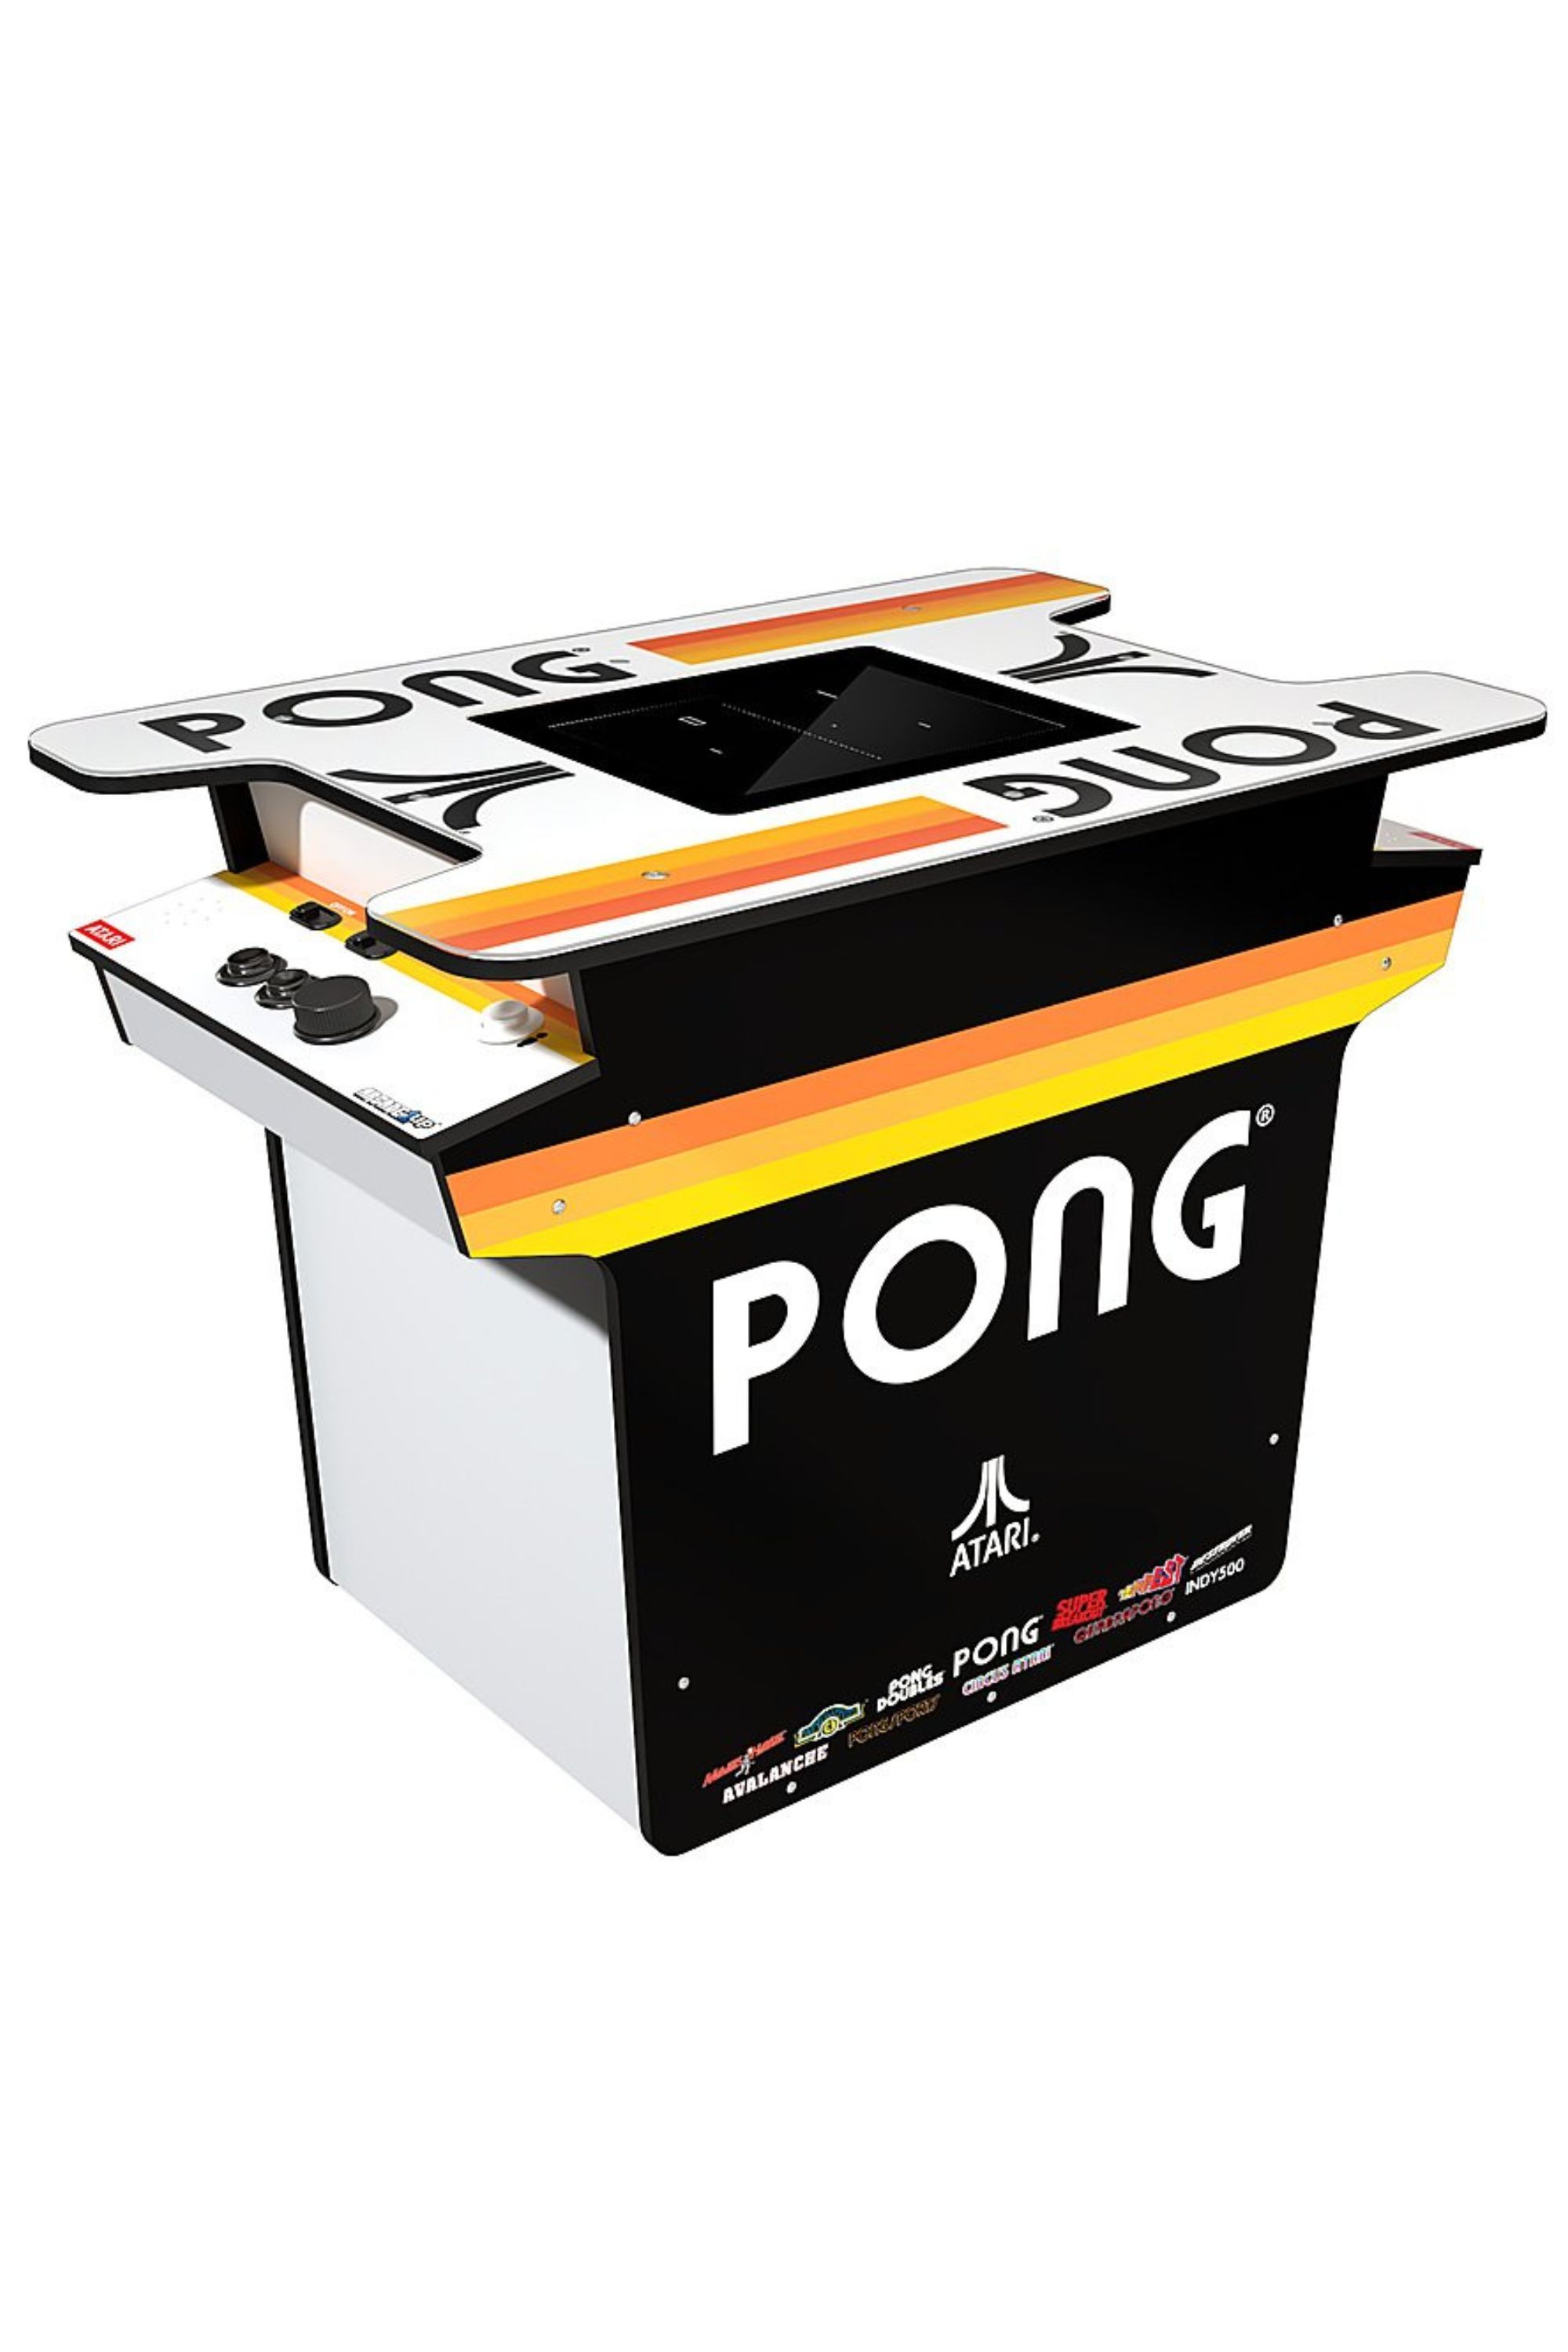 Product still for the Arcade1Up Pong 2-Player Gaming Table